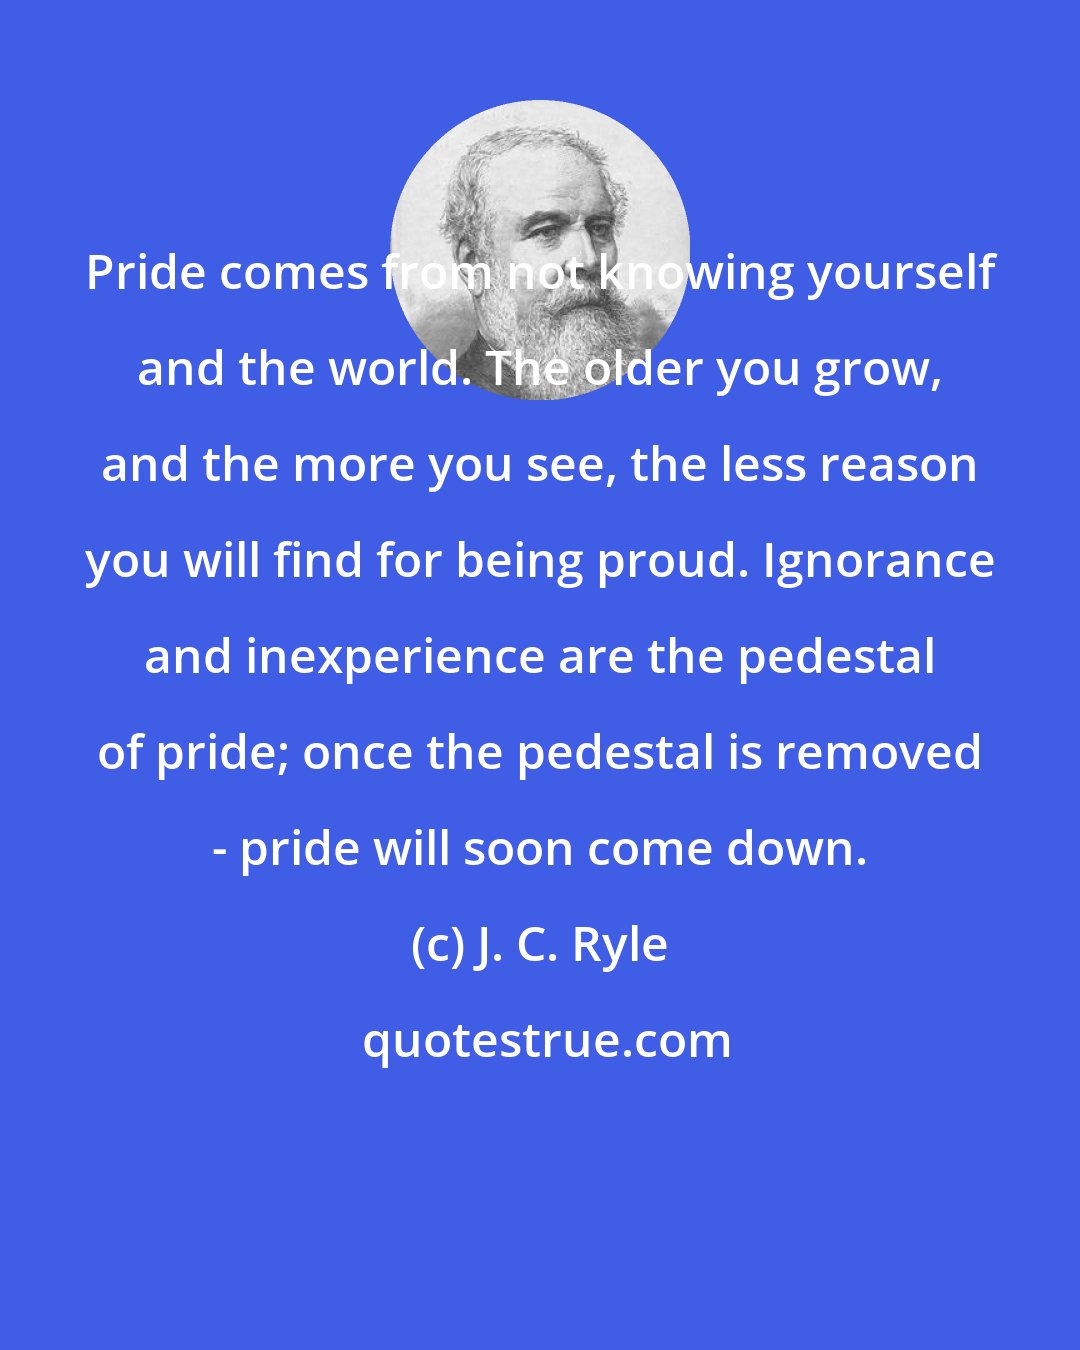 J. C. Ryle: Pride comes from not knowing yourself and the world. The older you grow, and the more you see, the less reason you will find for being proud. Ignorance and inexperience are the pedestal of pride; once the pedestal is removed - pride will soon come down.